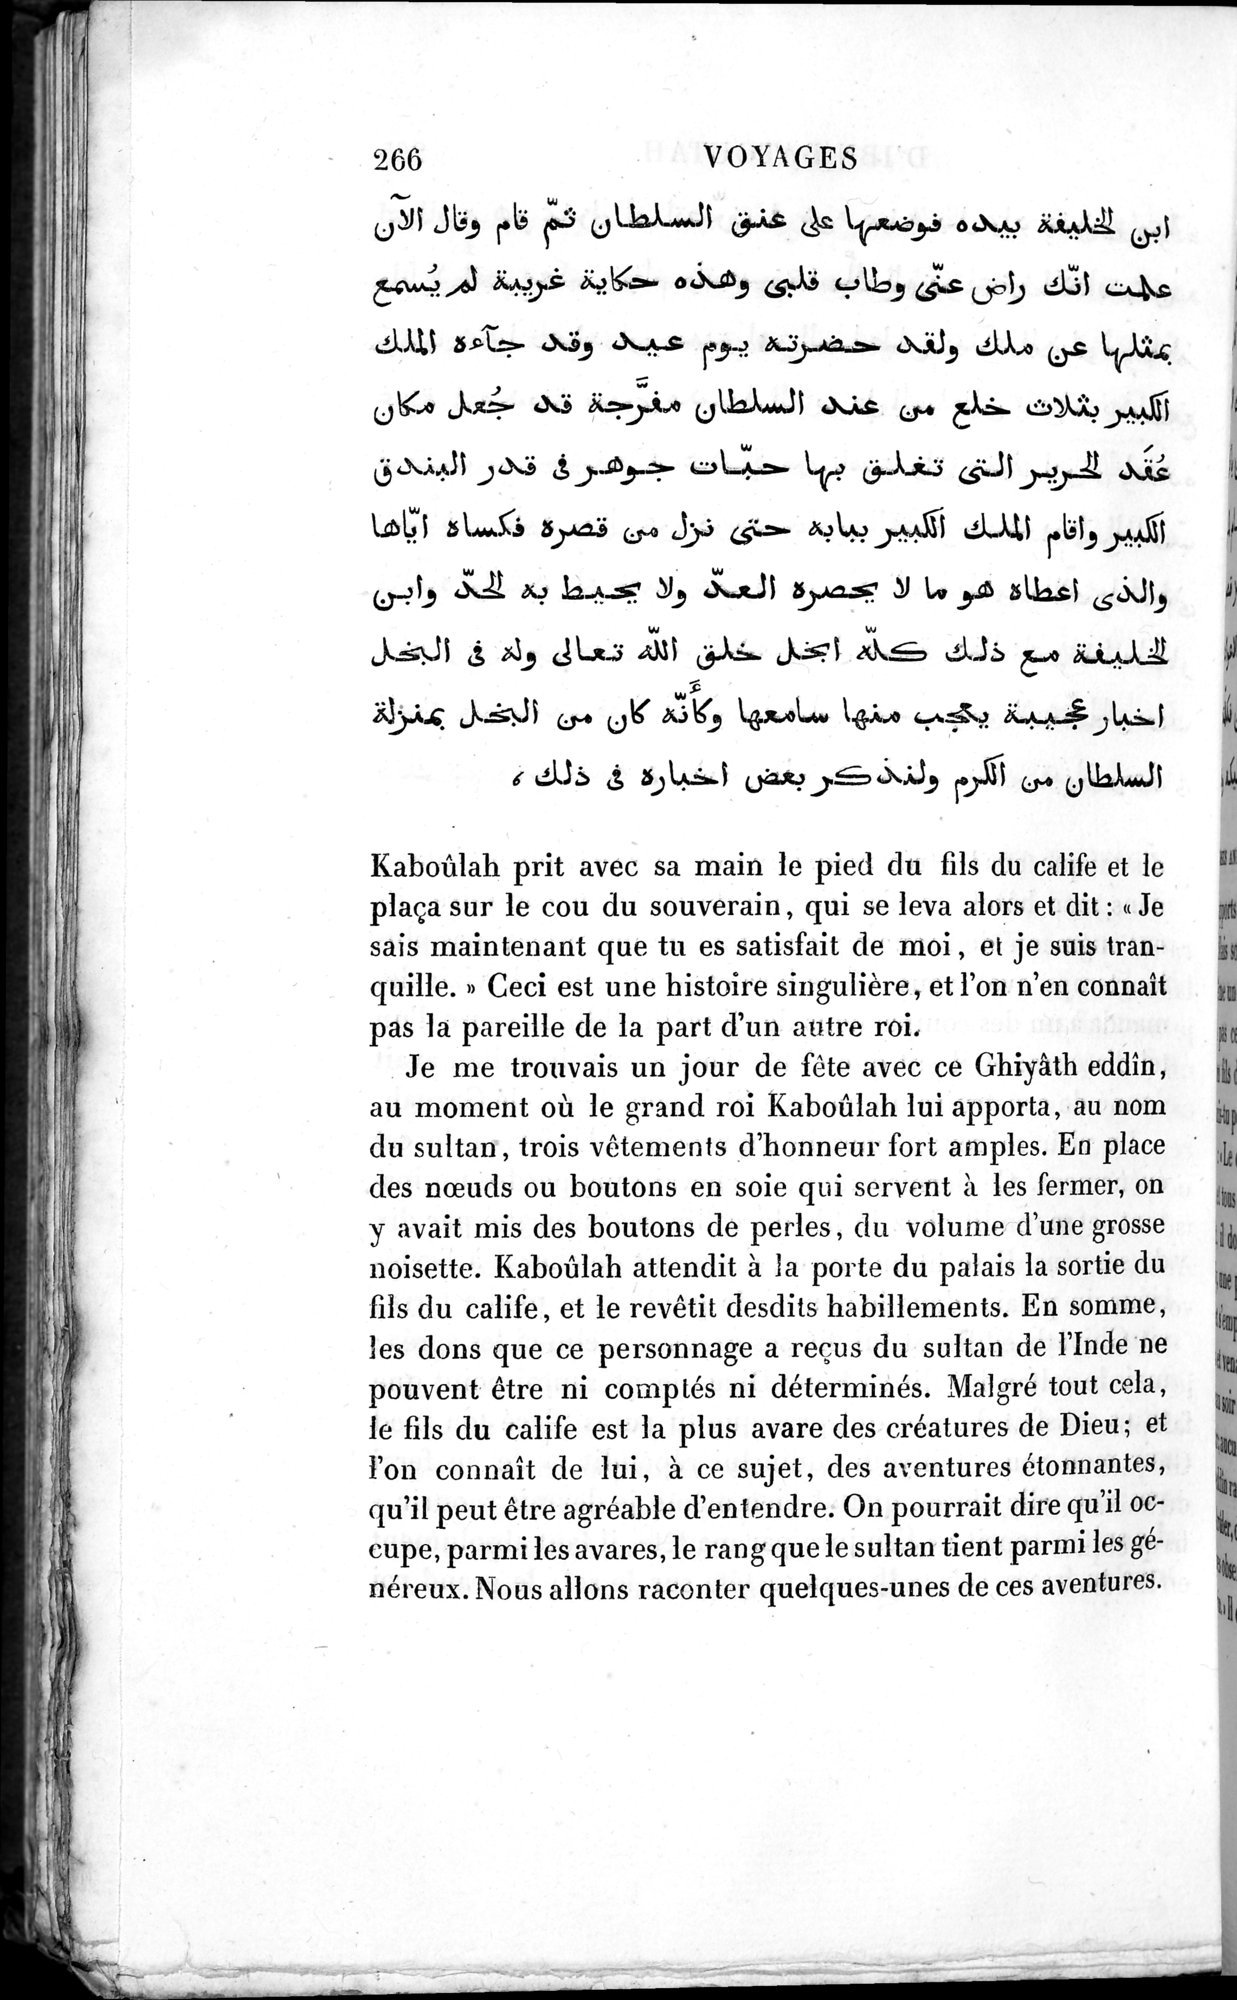 Voyages d'Ibn Batoutah : vol.3 / Page 306 (Grayscale High Resolution Image)